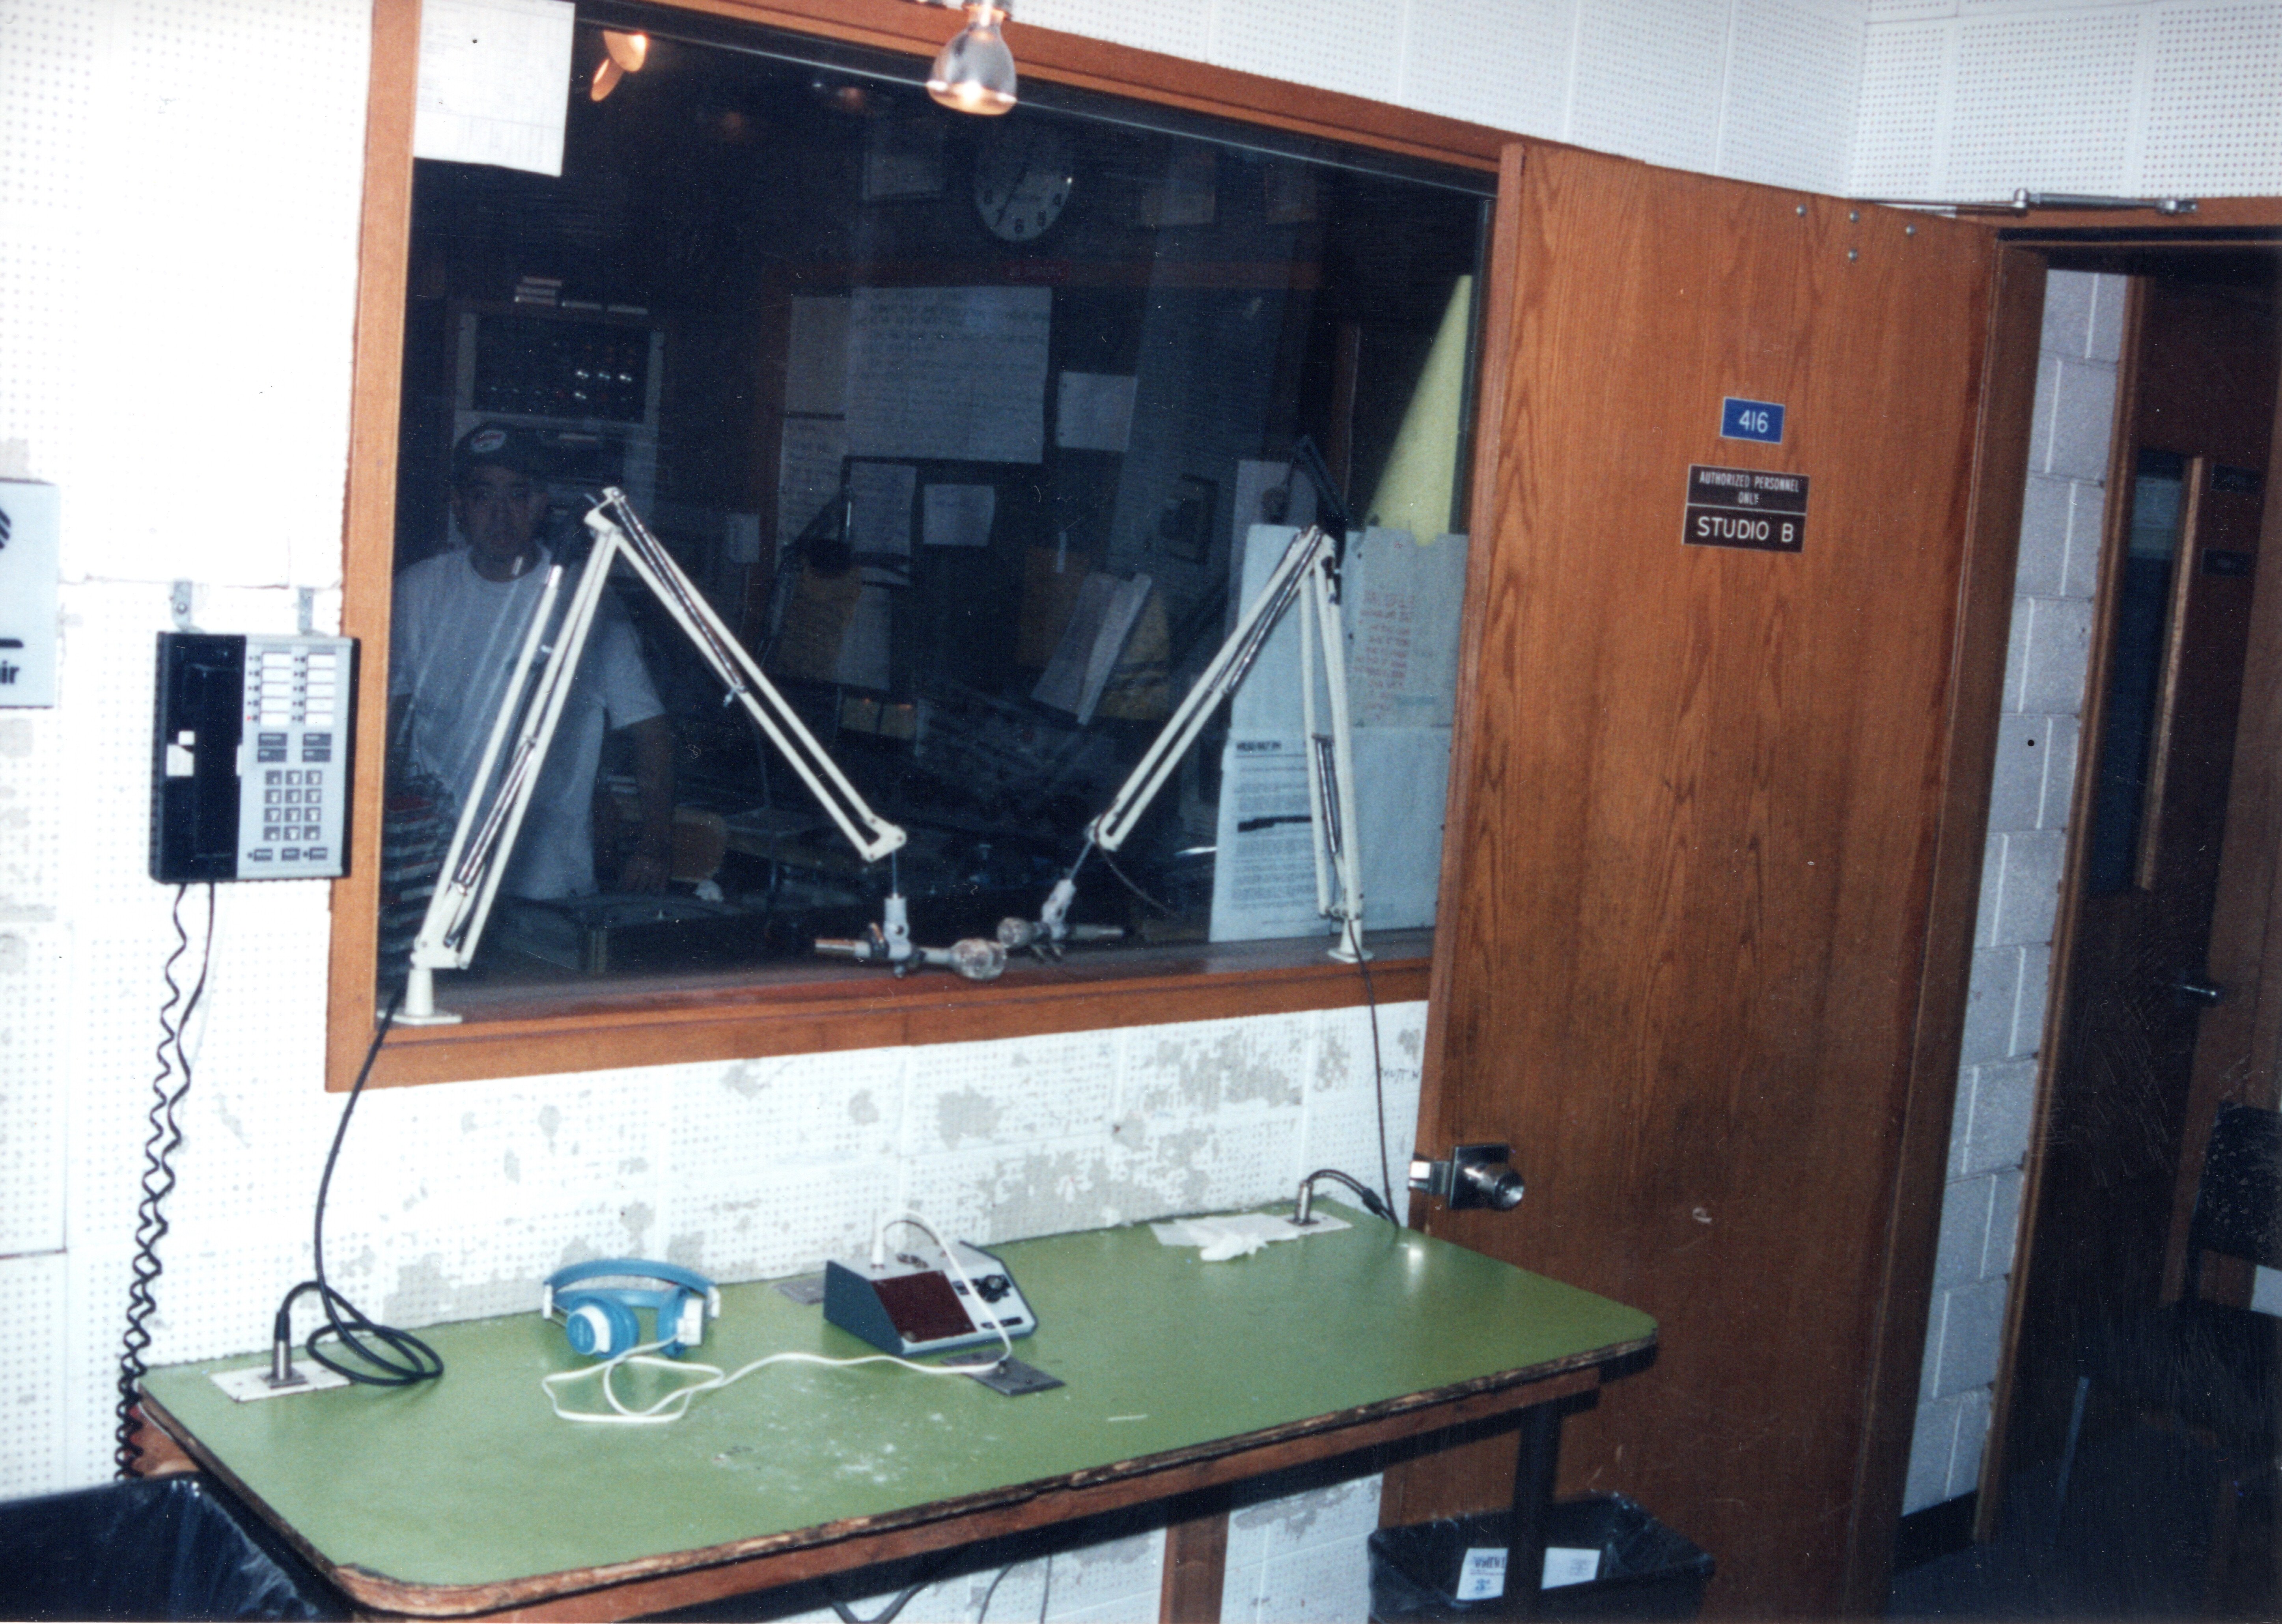 WRSU Studio B - This Version of Studio B was built by Fred Potter in 77-78